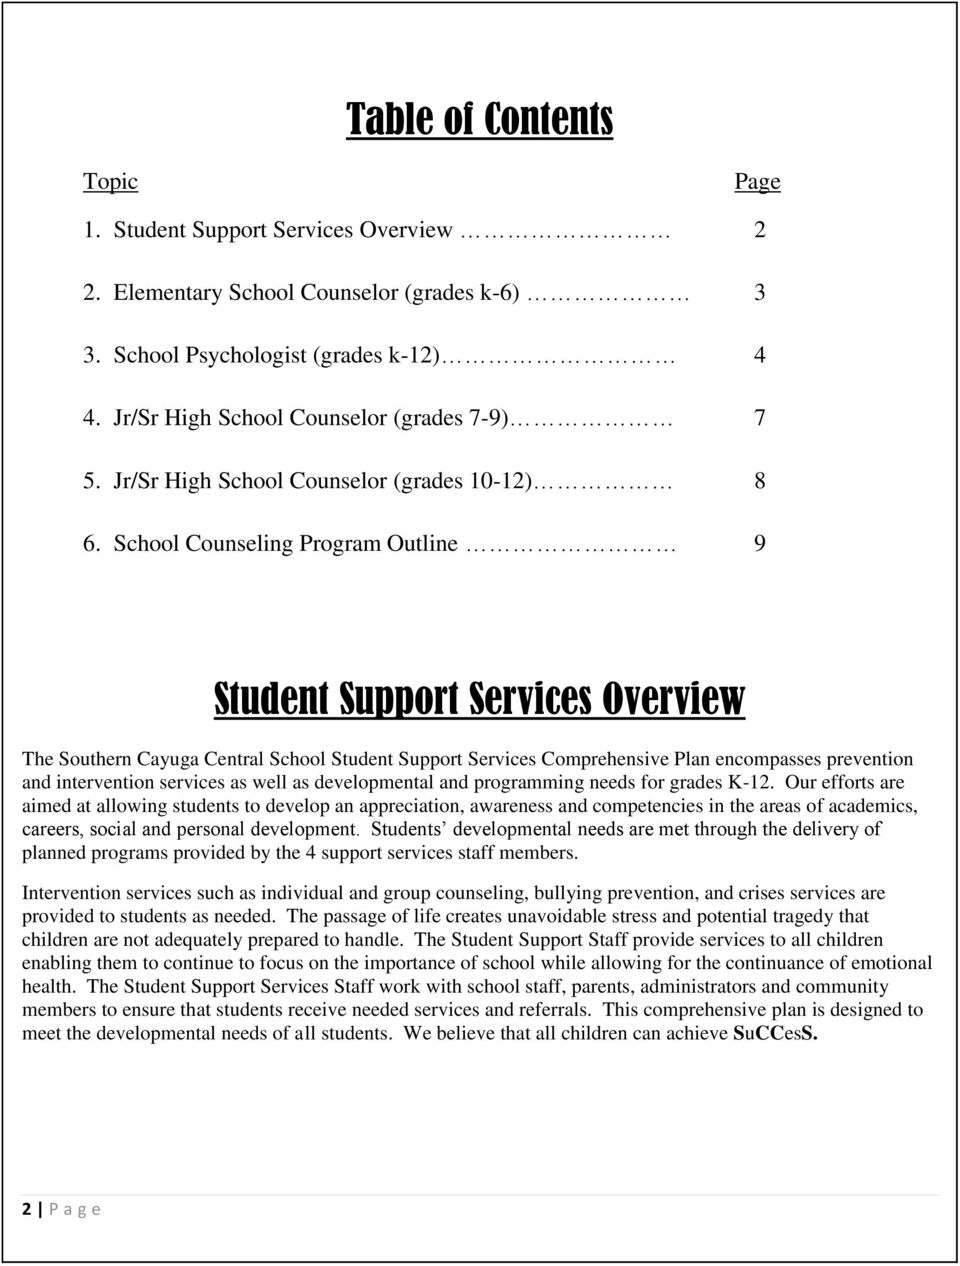 School Counseling Program Outline 9 Student Support Services Overview The Southern Cayuga Central School Student Support Services Comprehensive Plan encompasses prevention and intervention services